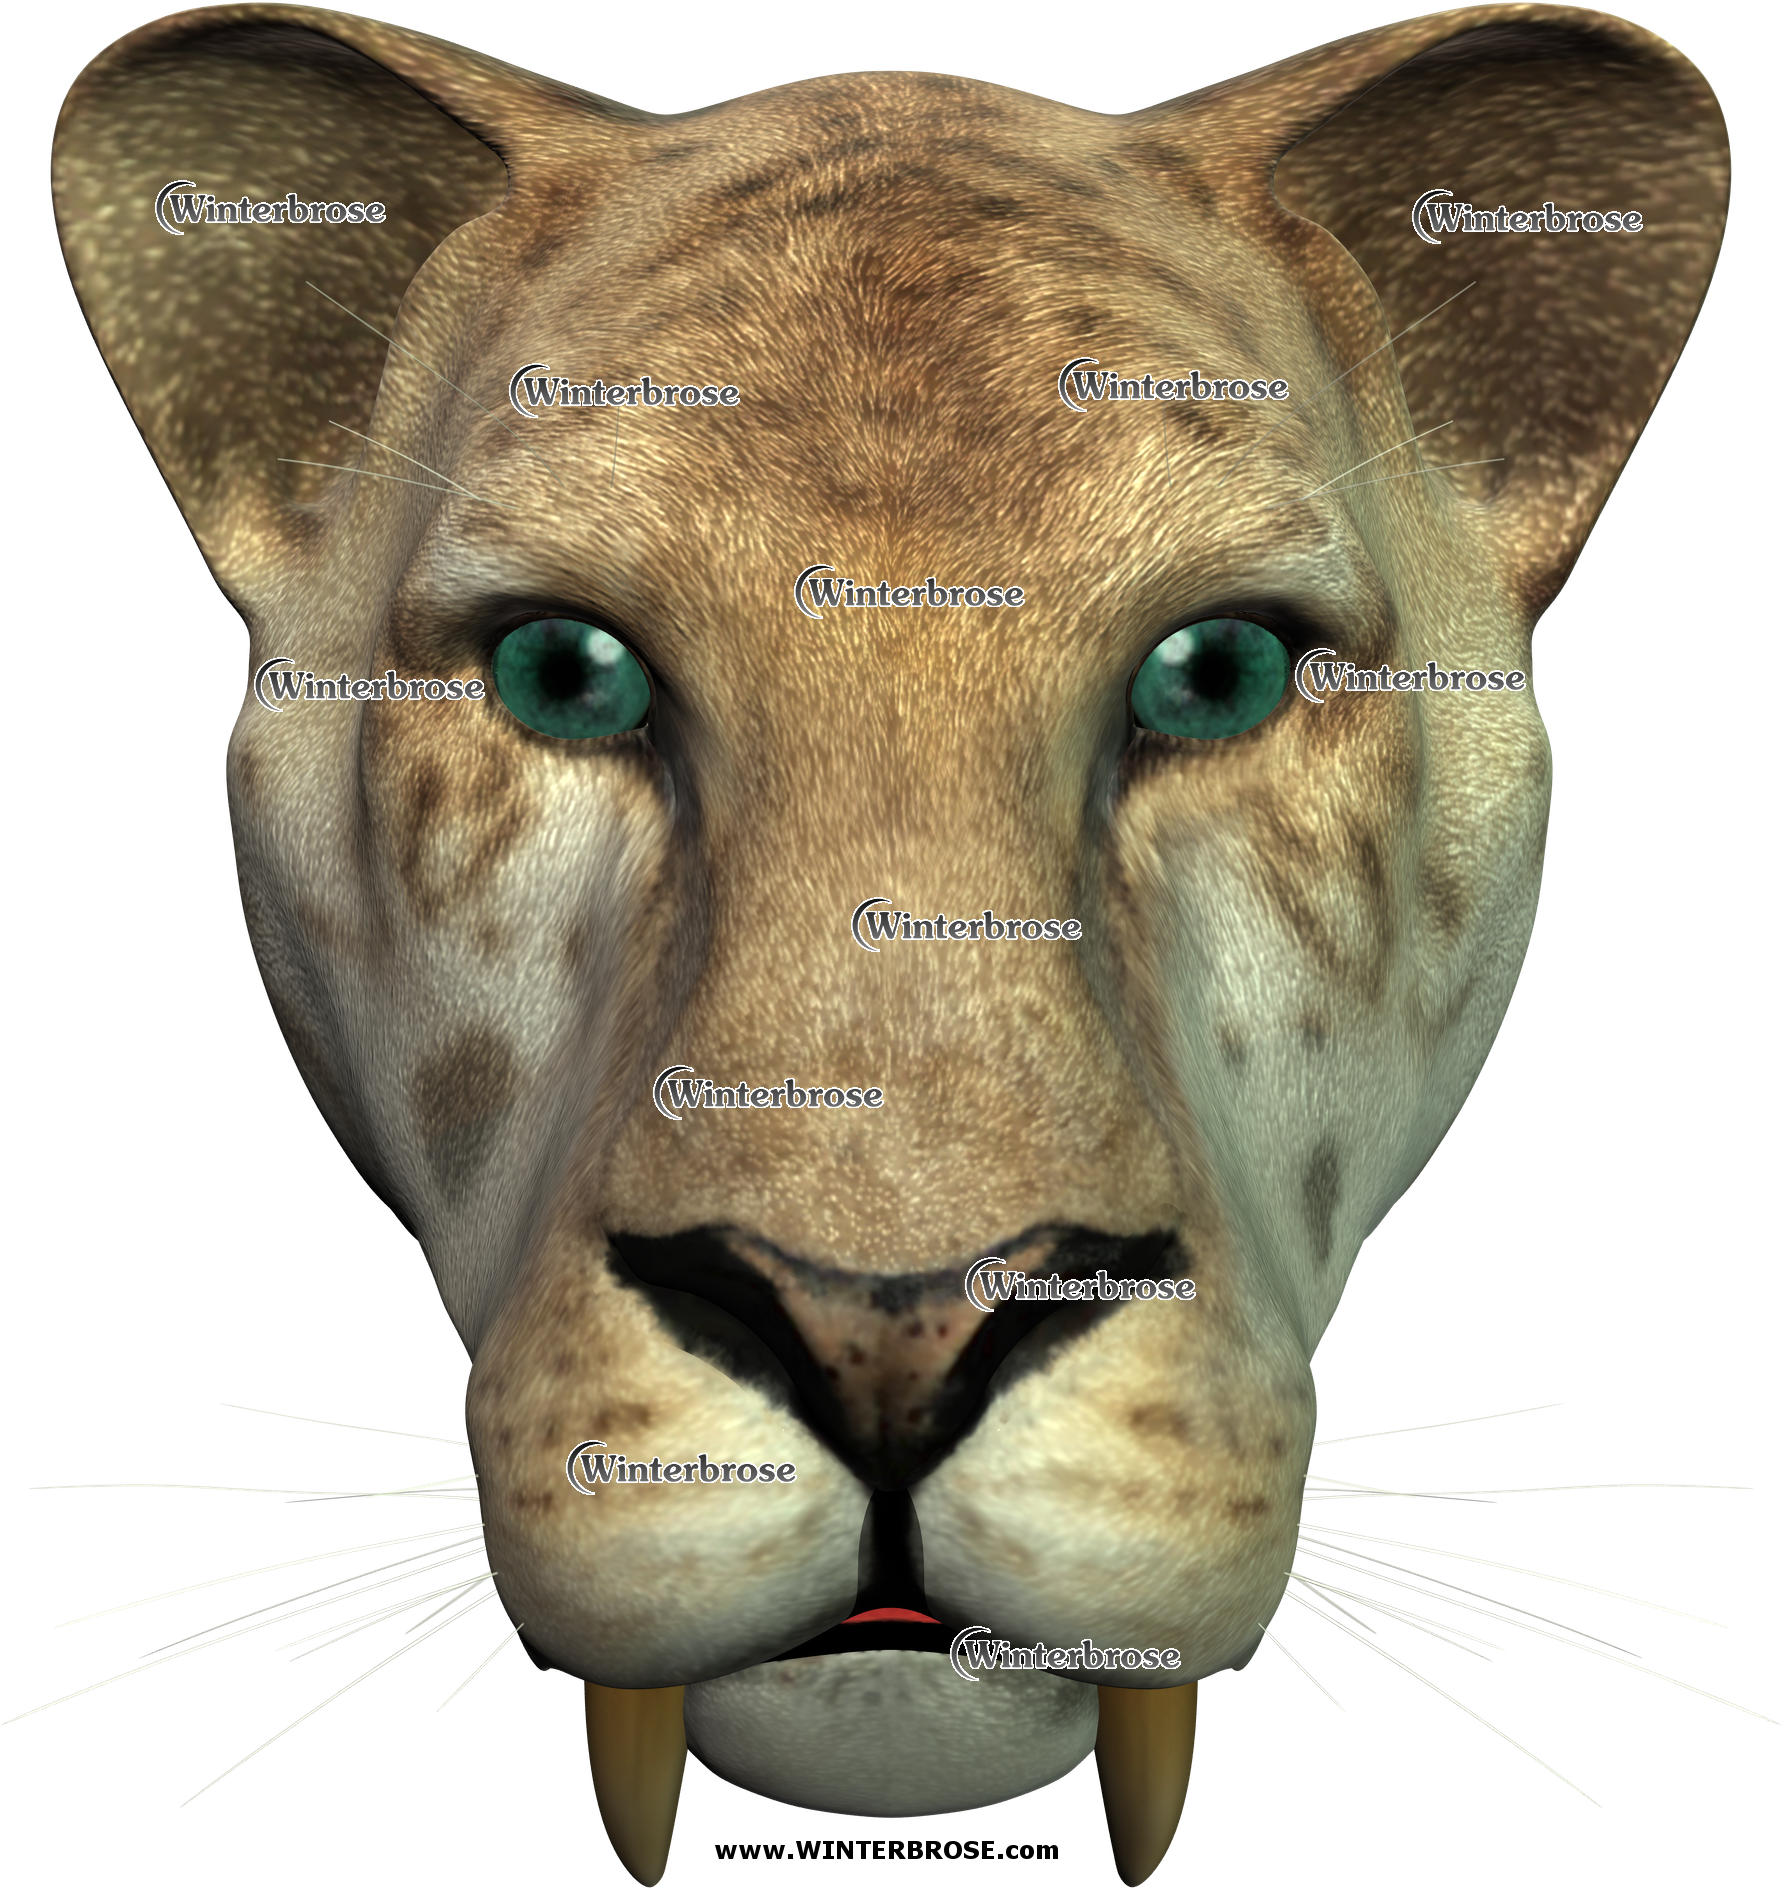 SABERTOOTH, guardian of past ancient kingdoms, display this face shot anywhere you need this wild cat to appear.